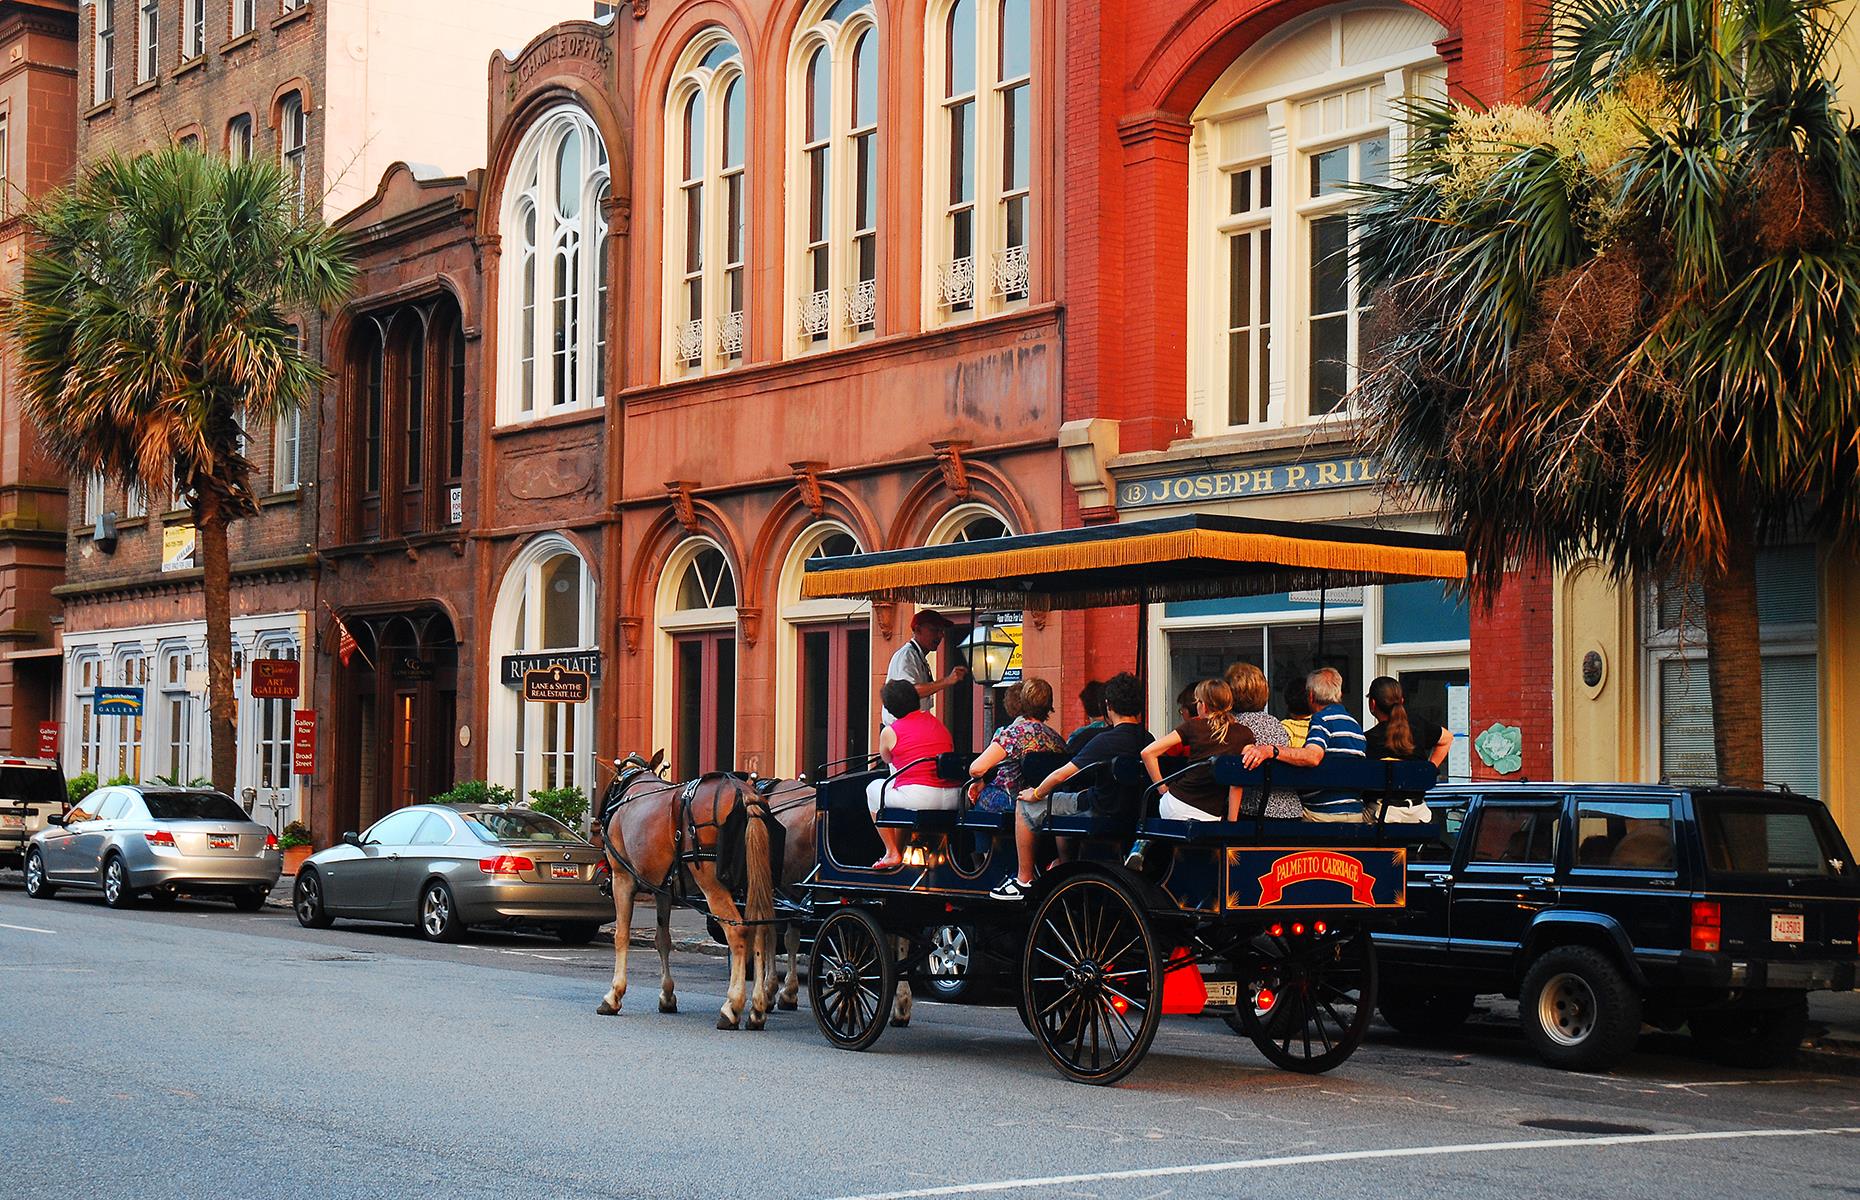 <p>Famous for its horse-drawn carriages, Charleston is perfect for a car-free weekend. Its historic downtown is incredibly compact and must-see landmarks like Rainbow Row (a line of vibrantly colored historic houses) are pedestrian-friendly. There's also a <a href="https://freetoursbyfoot.com/free-public-transportation-charleston-dash-trolley/">free downtown trolley service</a> that connects key points of interest, and there are plenty of bike rental shops that can help you make the most of Charleston's tree-lined streets, waterfront parks and beaches. While here, don't miss out on a carriage ride or a <a href="https://freetoursbyfoot.com/charleston-sc-tours/">free walking tour</a> to learn more about the history of South Carolina's largest city.</p>